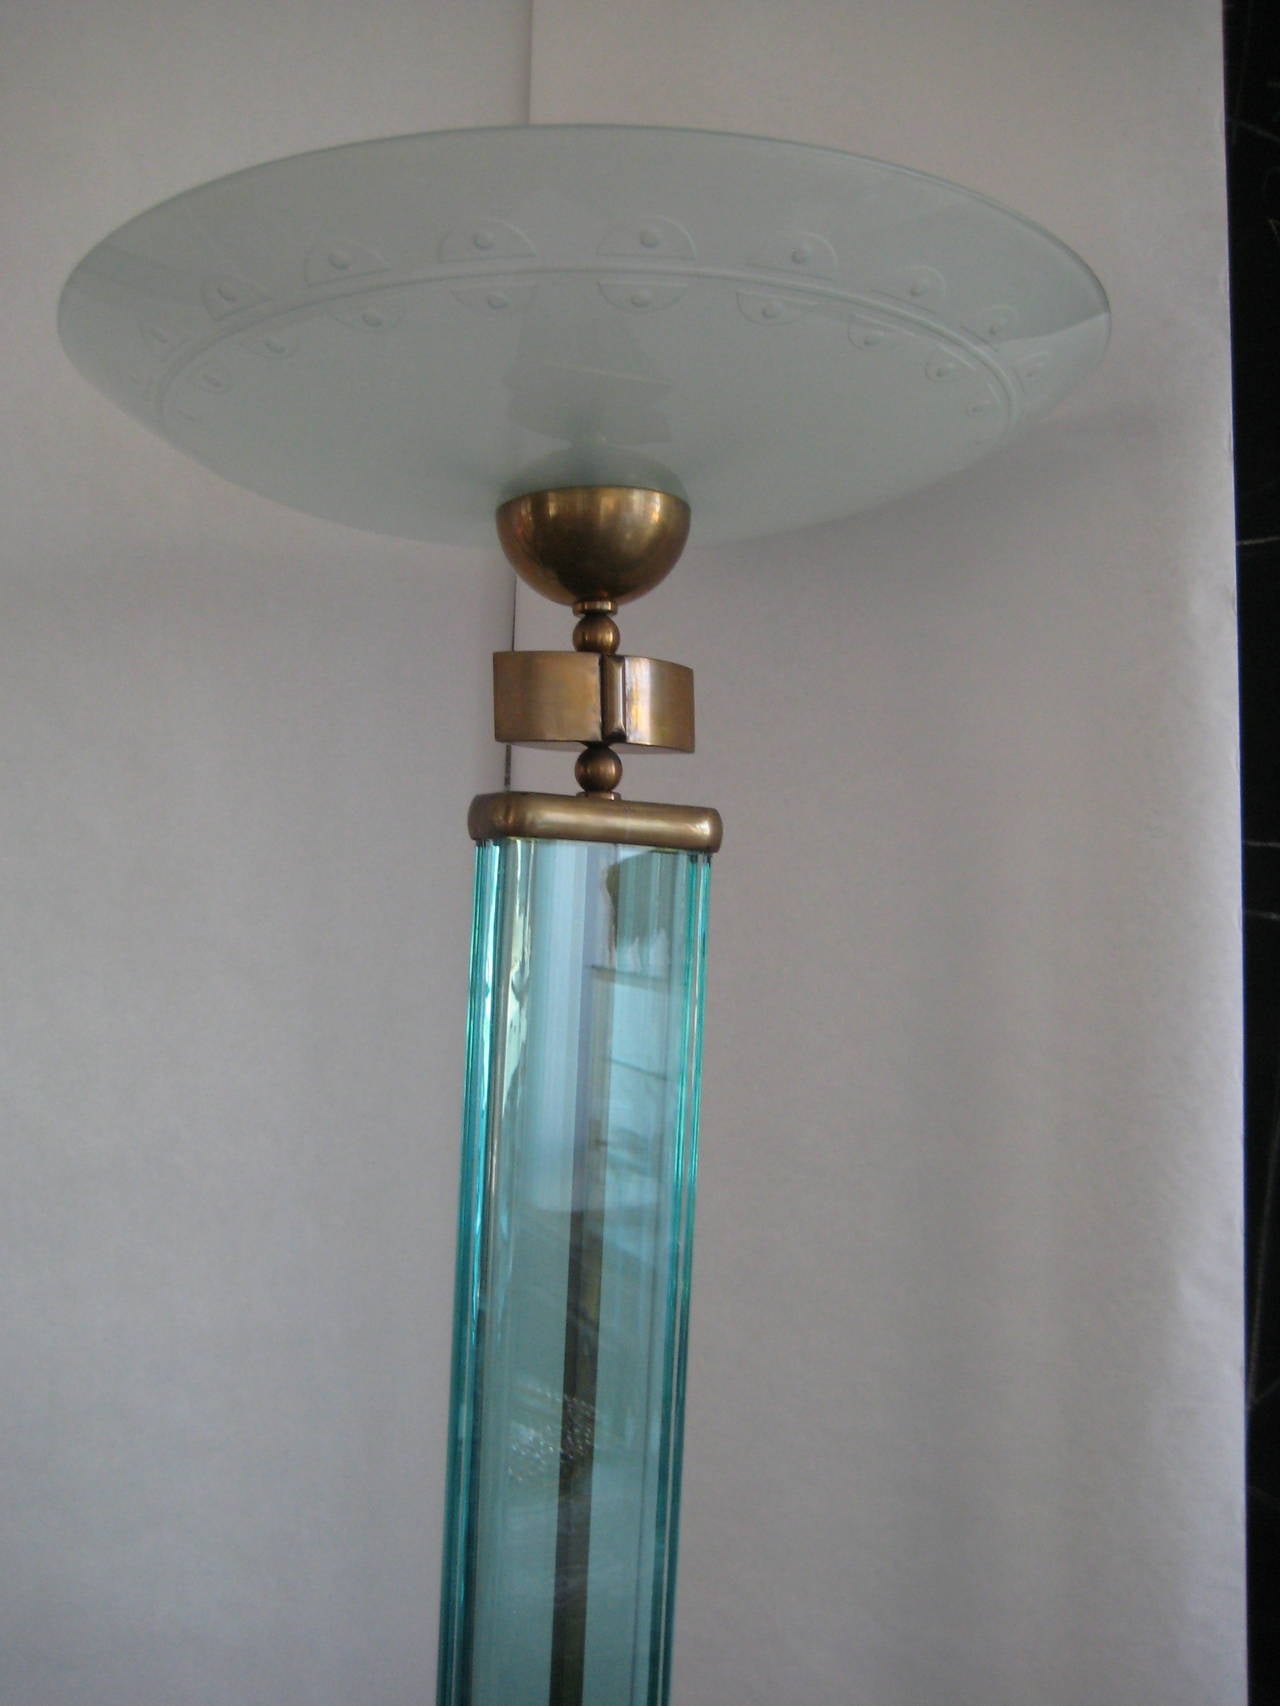 Heavy glass column supporting a large glass shade which
directs light upwards.